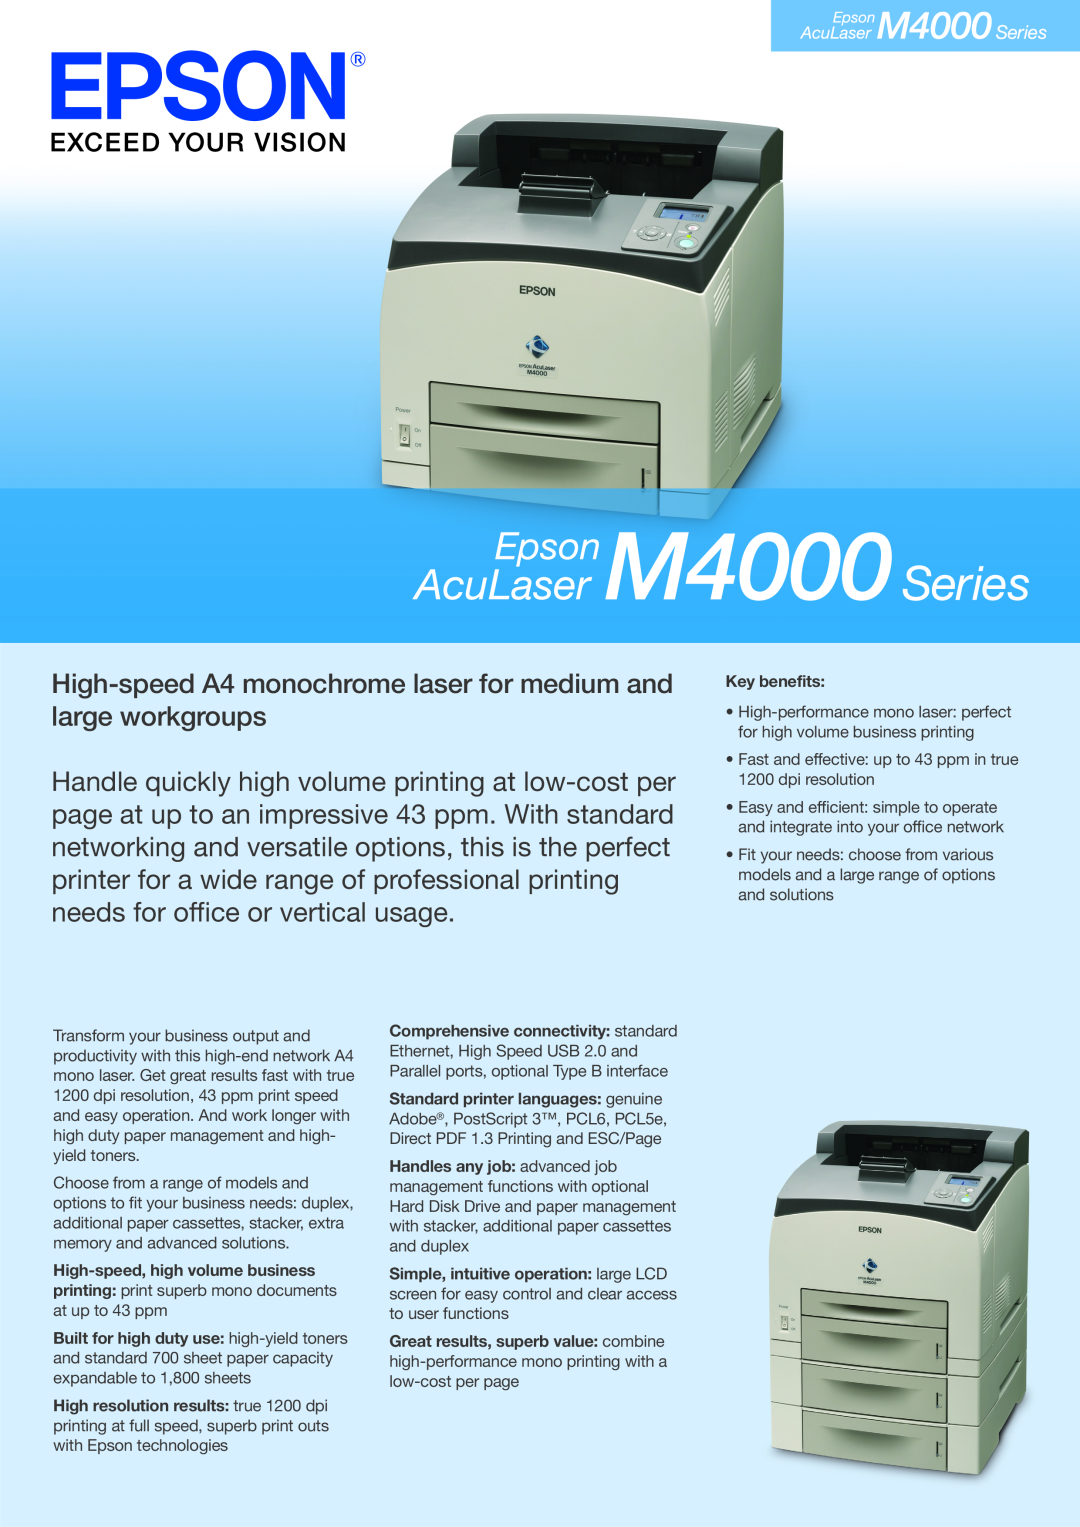 Epson M4000 manual High-speed A4 monochrome laser for medium and large workgroups 